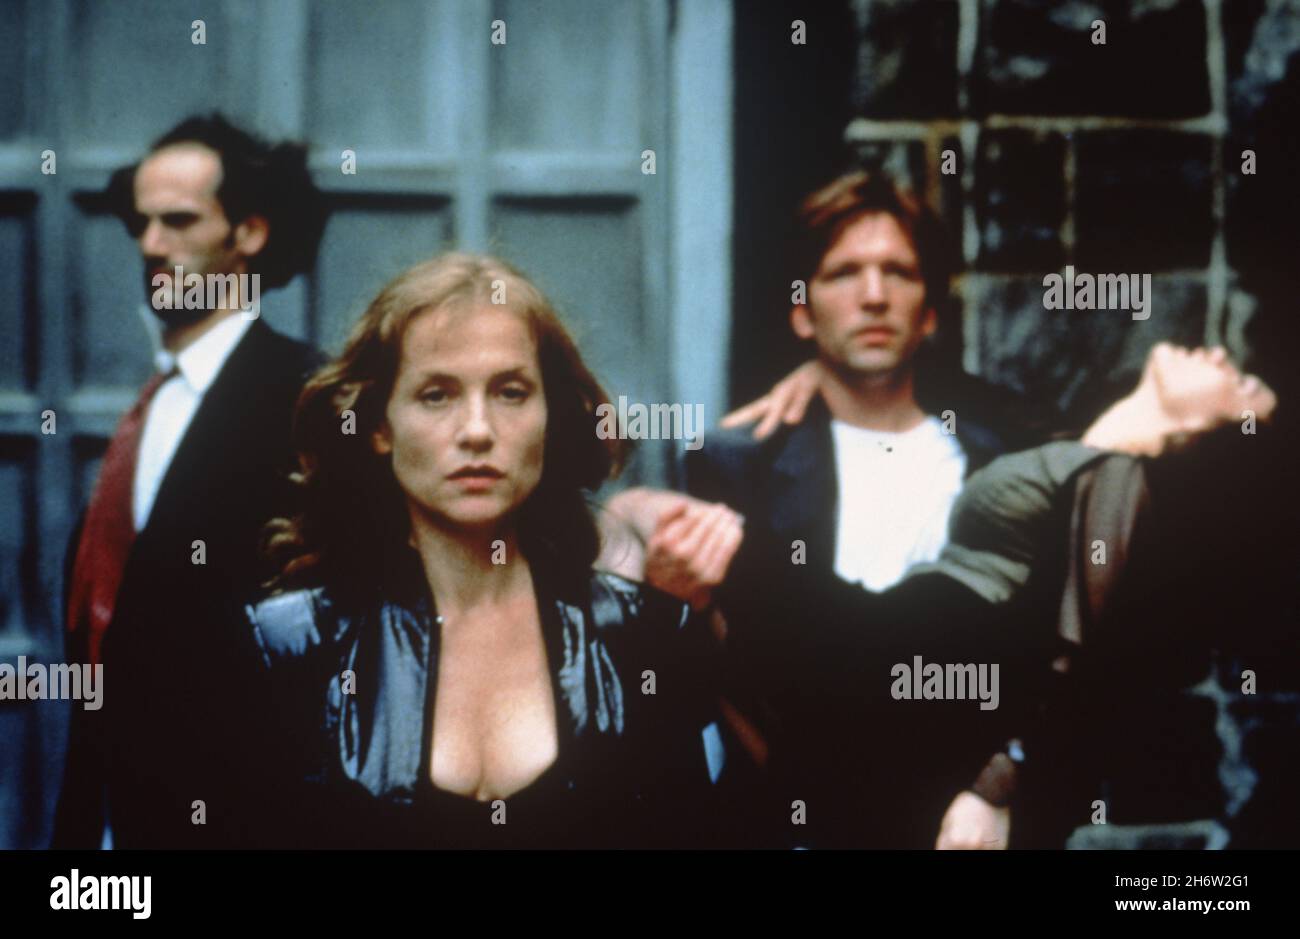 AMATEUR (1994) DAMIAN YOUNG  ISABELLE HUPPERT  MARTIN DONOVAN  ELINA LOWENSOHN  HAL HARTLEY (DIR)  SONY PICTURES CLASSICS/MOVIESTORE COLLECTION LTD Stock Photo